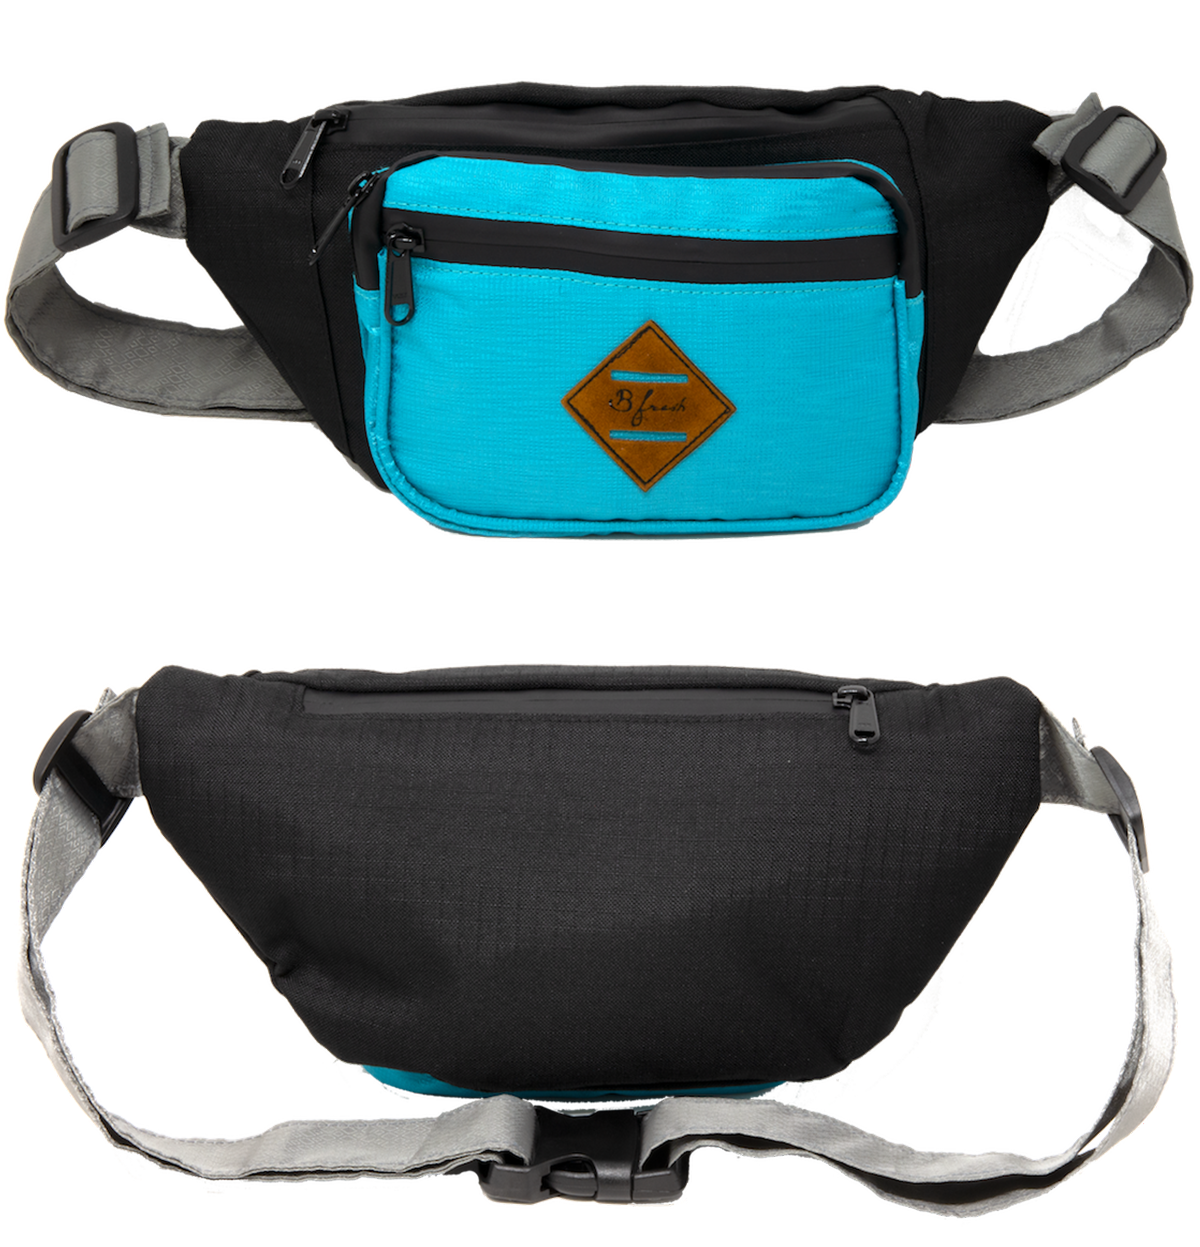 Rainier Water Resistant Fanny Pack - B Fresh - Blue grey black water proof material fanny pack with black water resistant zippers retro throwback design. B Fresh Gear